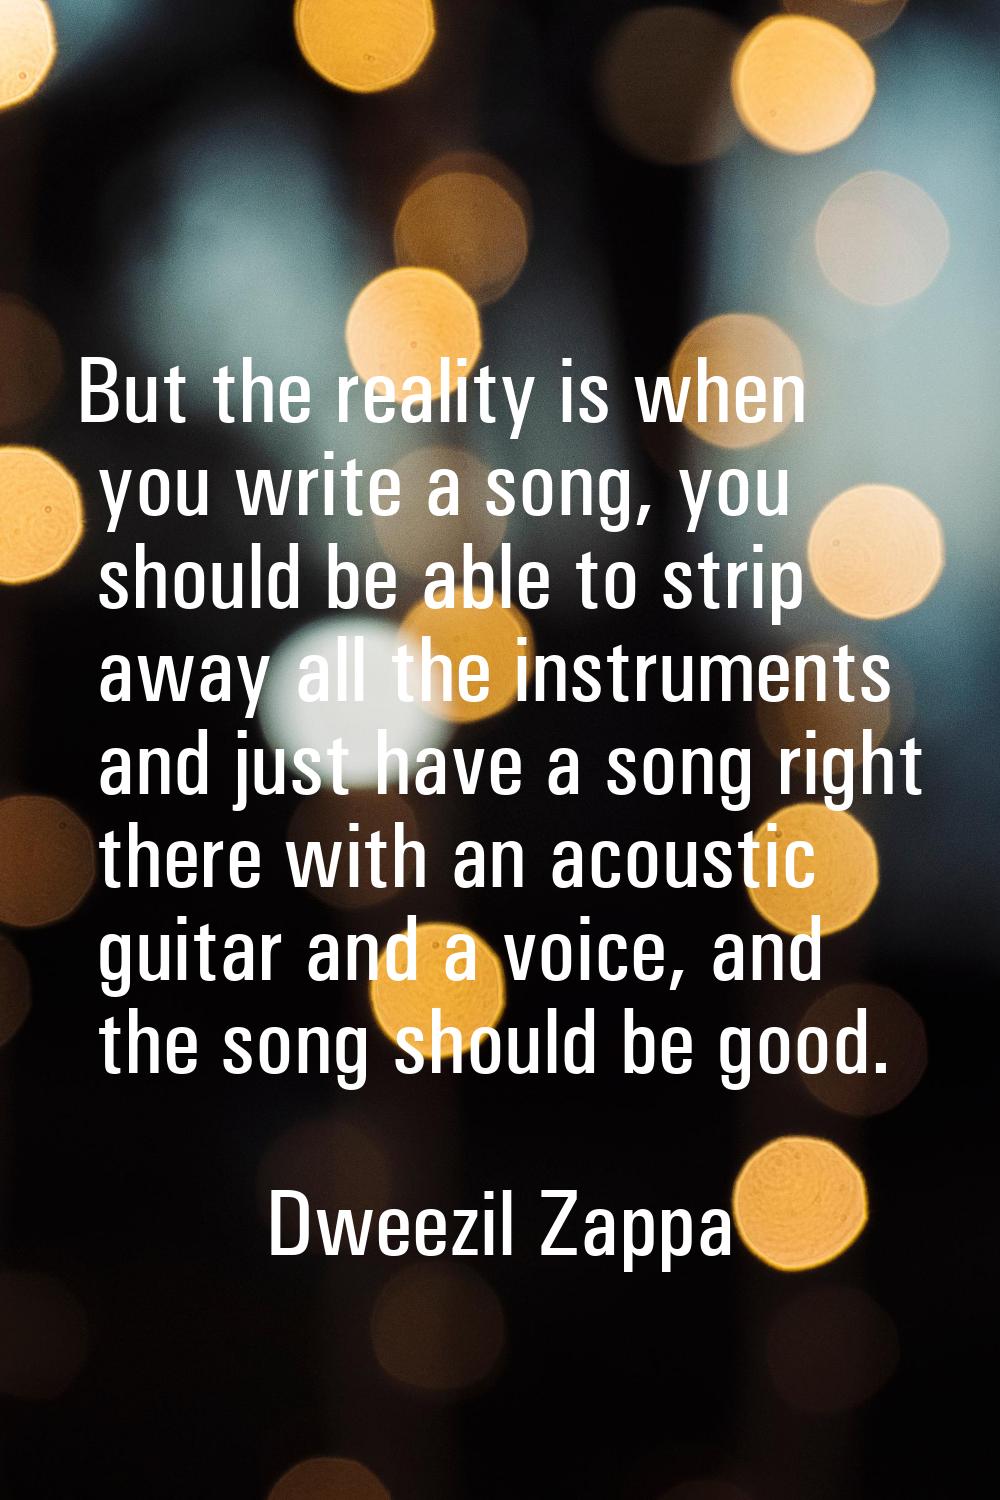 But the reality is when you write a song, you should be able to strip away all the instruments and 